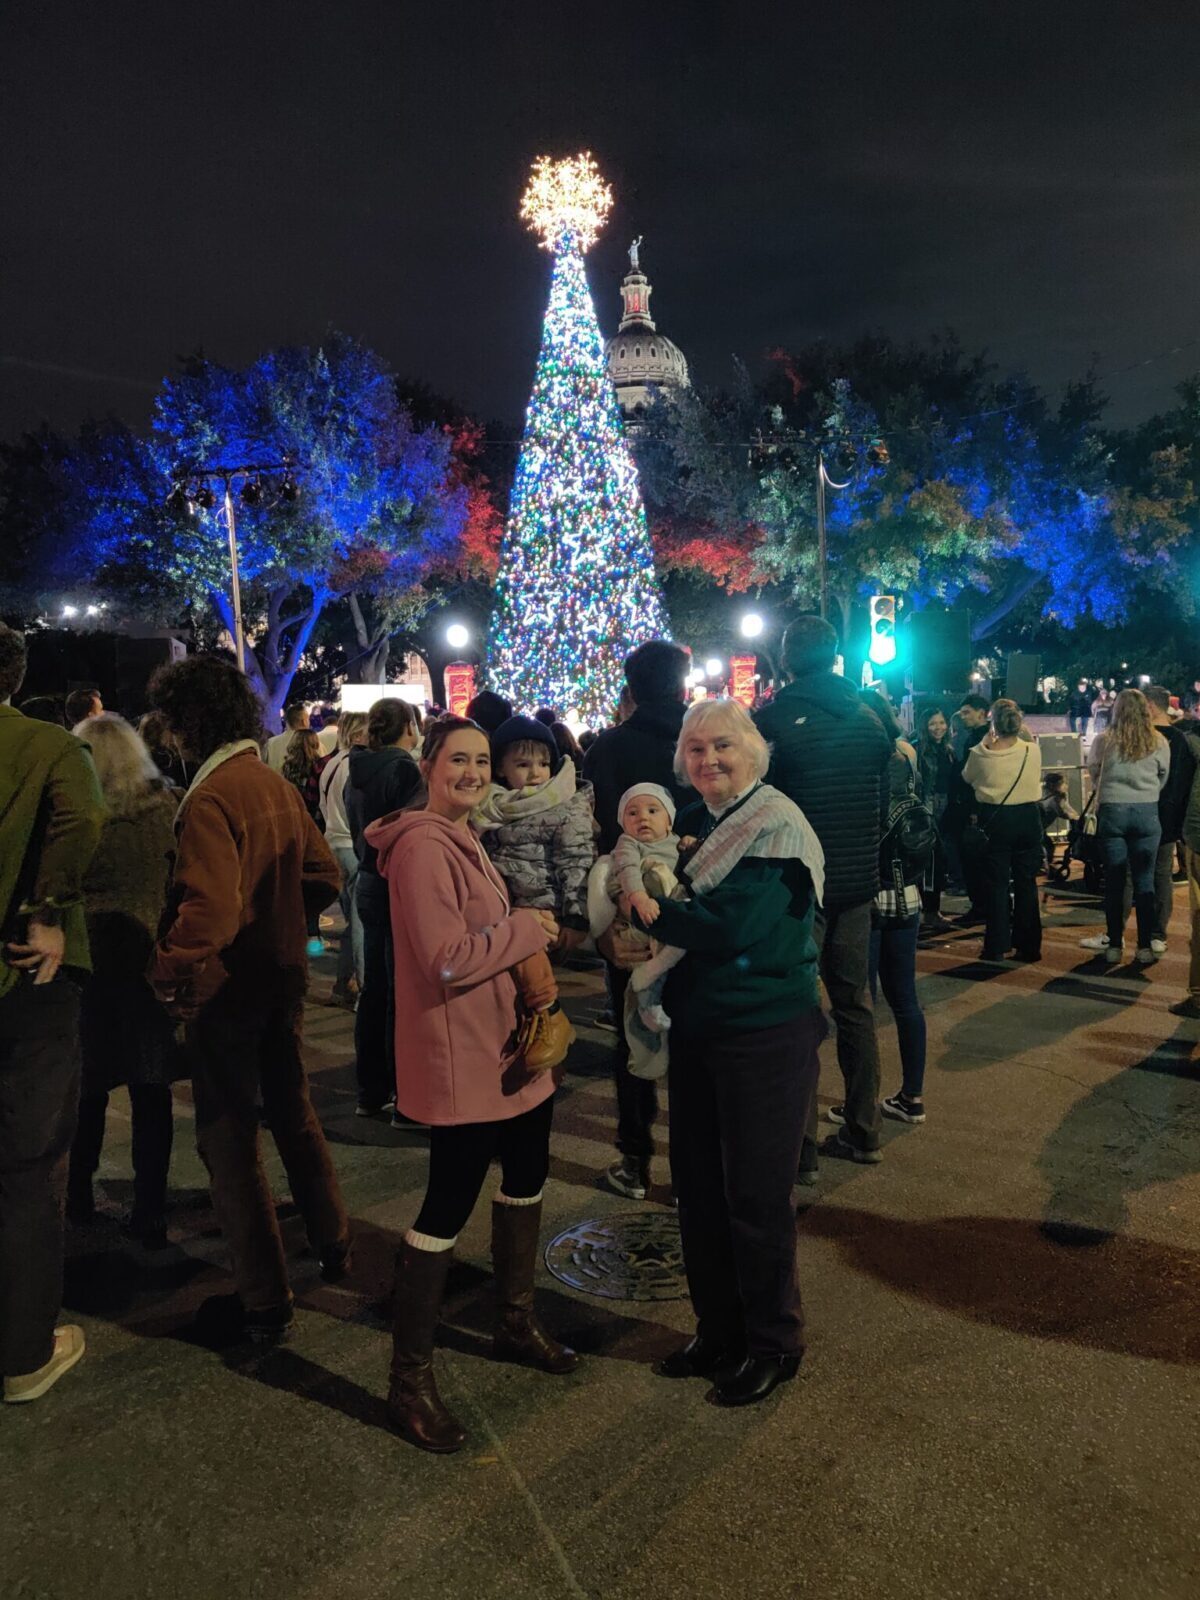 Grandmother, Daughter-in-law, and grandson all standing in front of the tree at the Texas State Capitol.